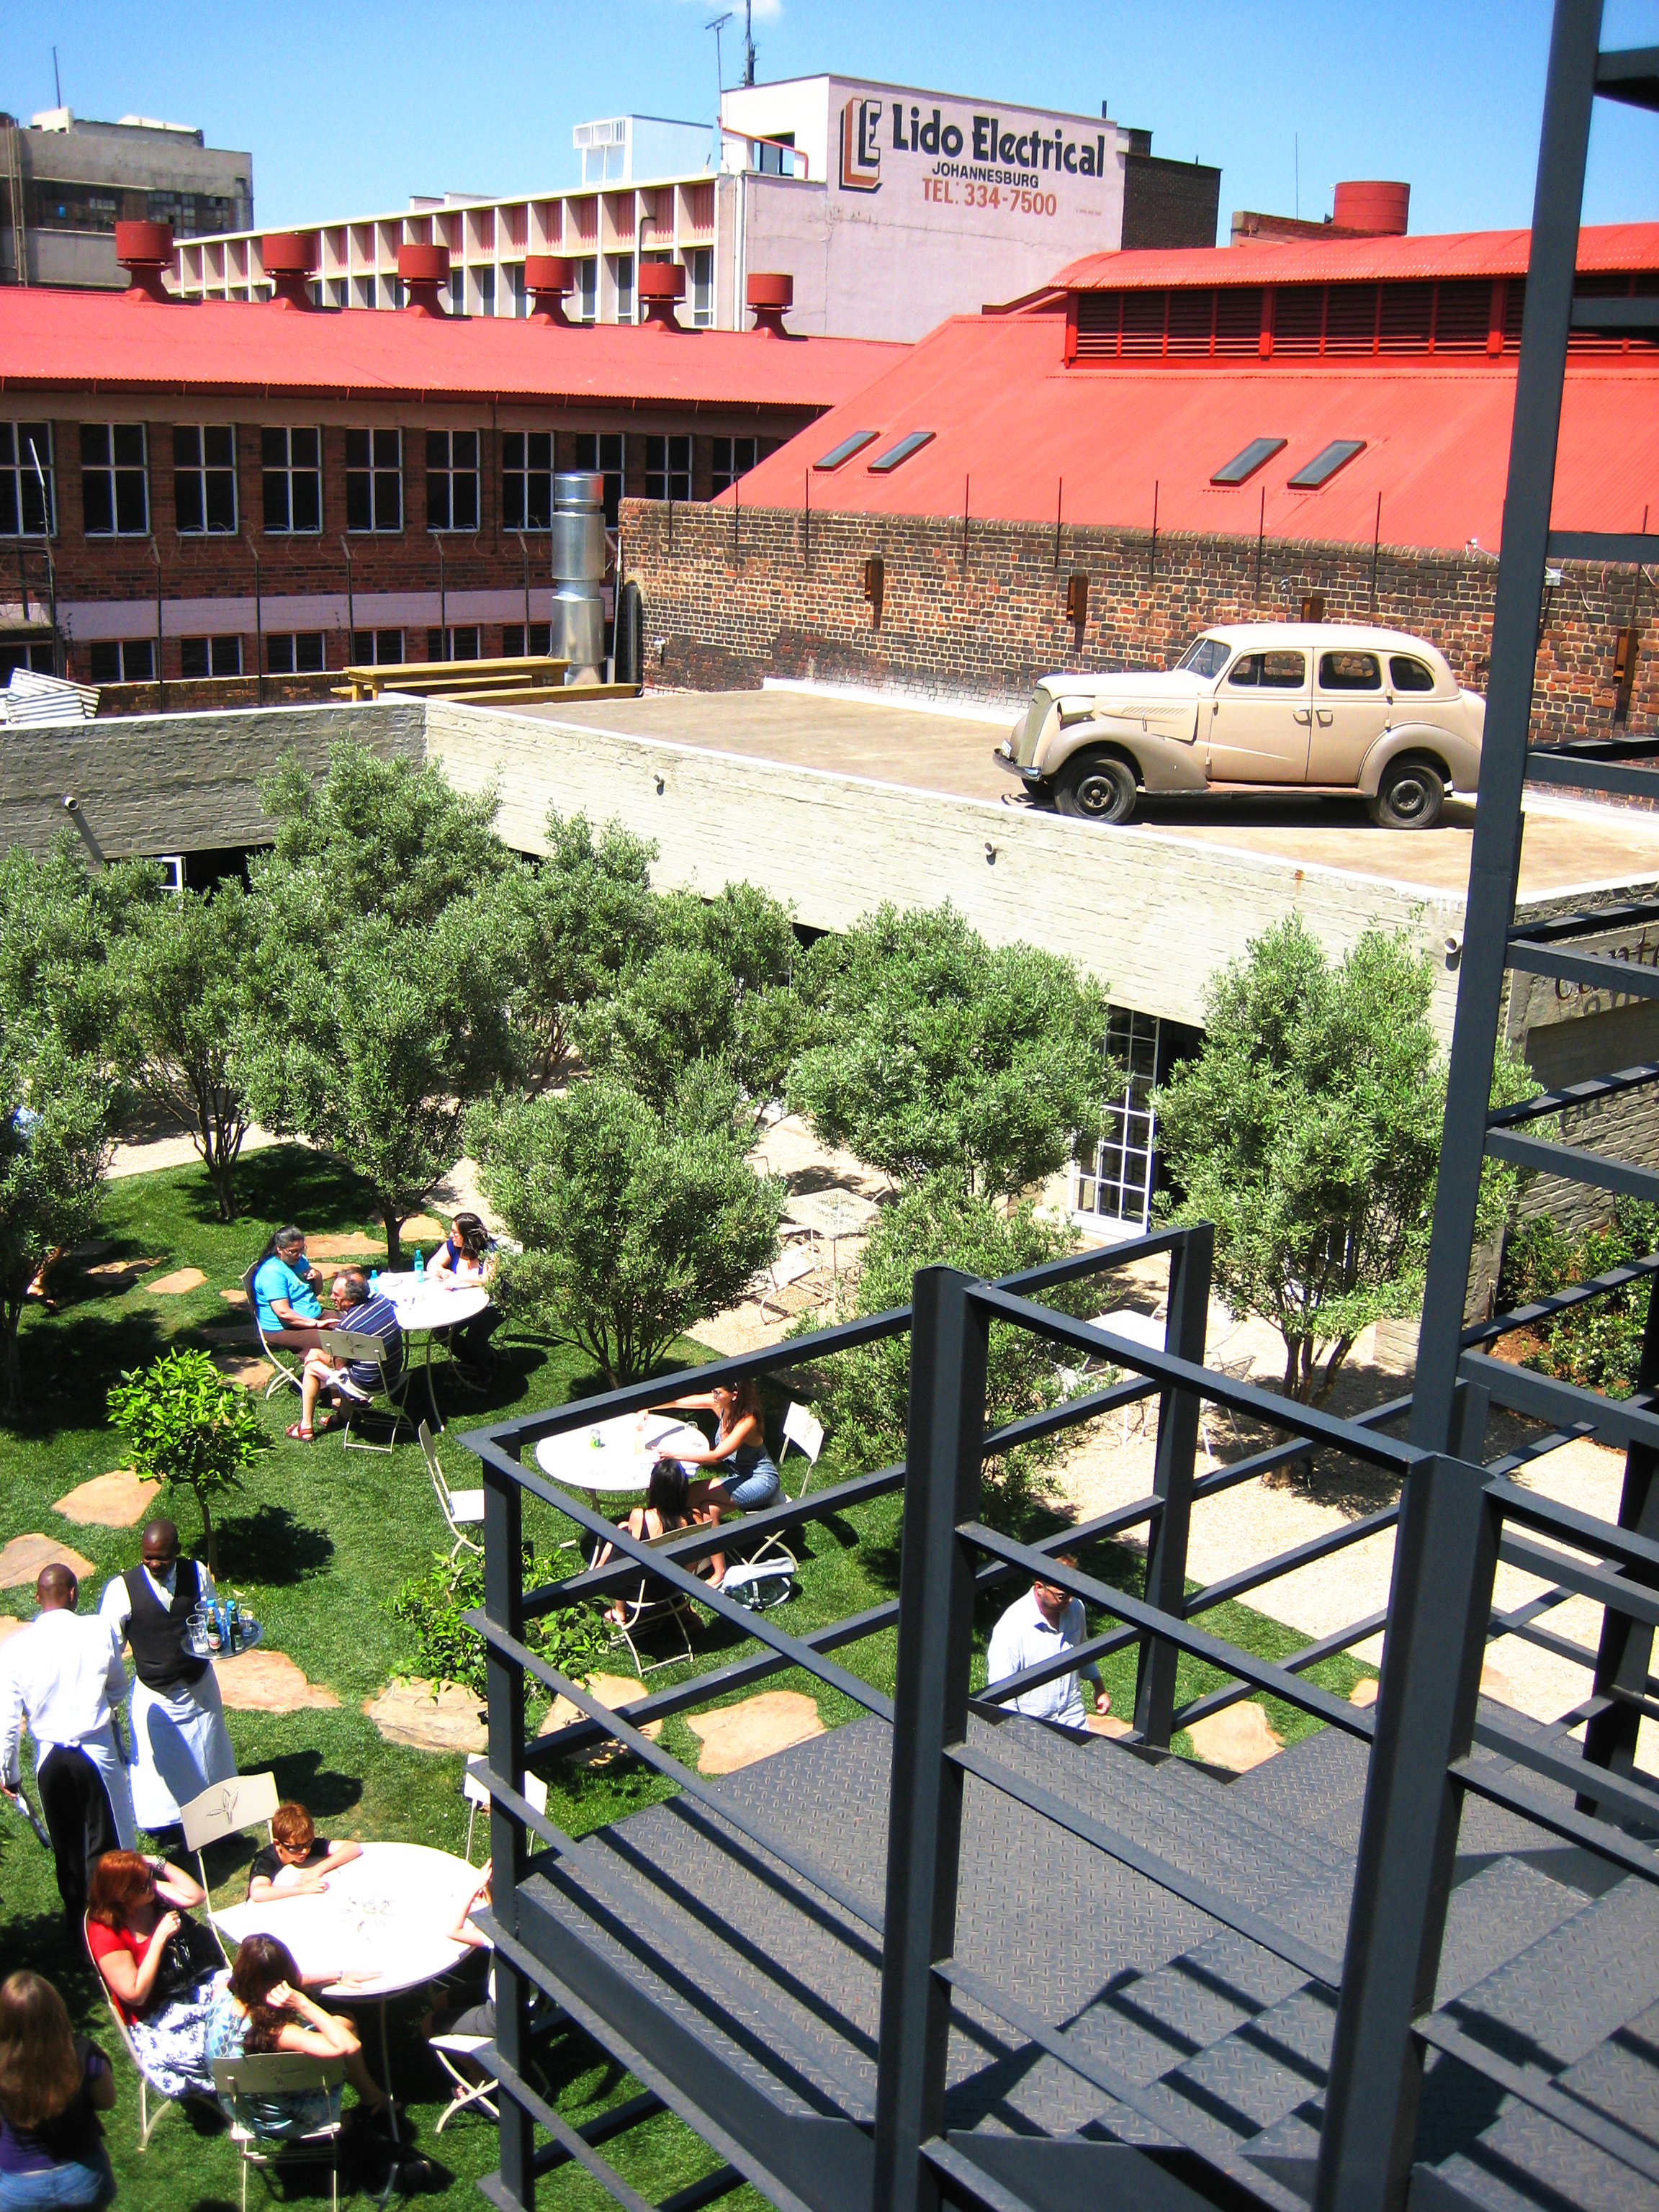 People sitting around small tables in a grassy courtyard